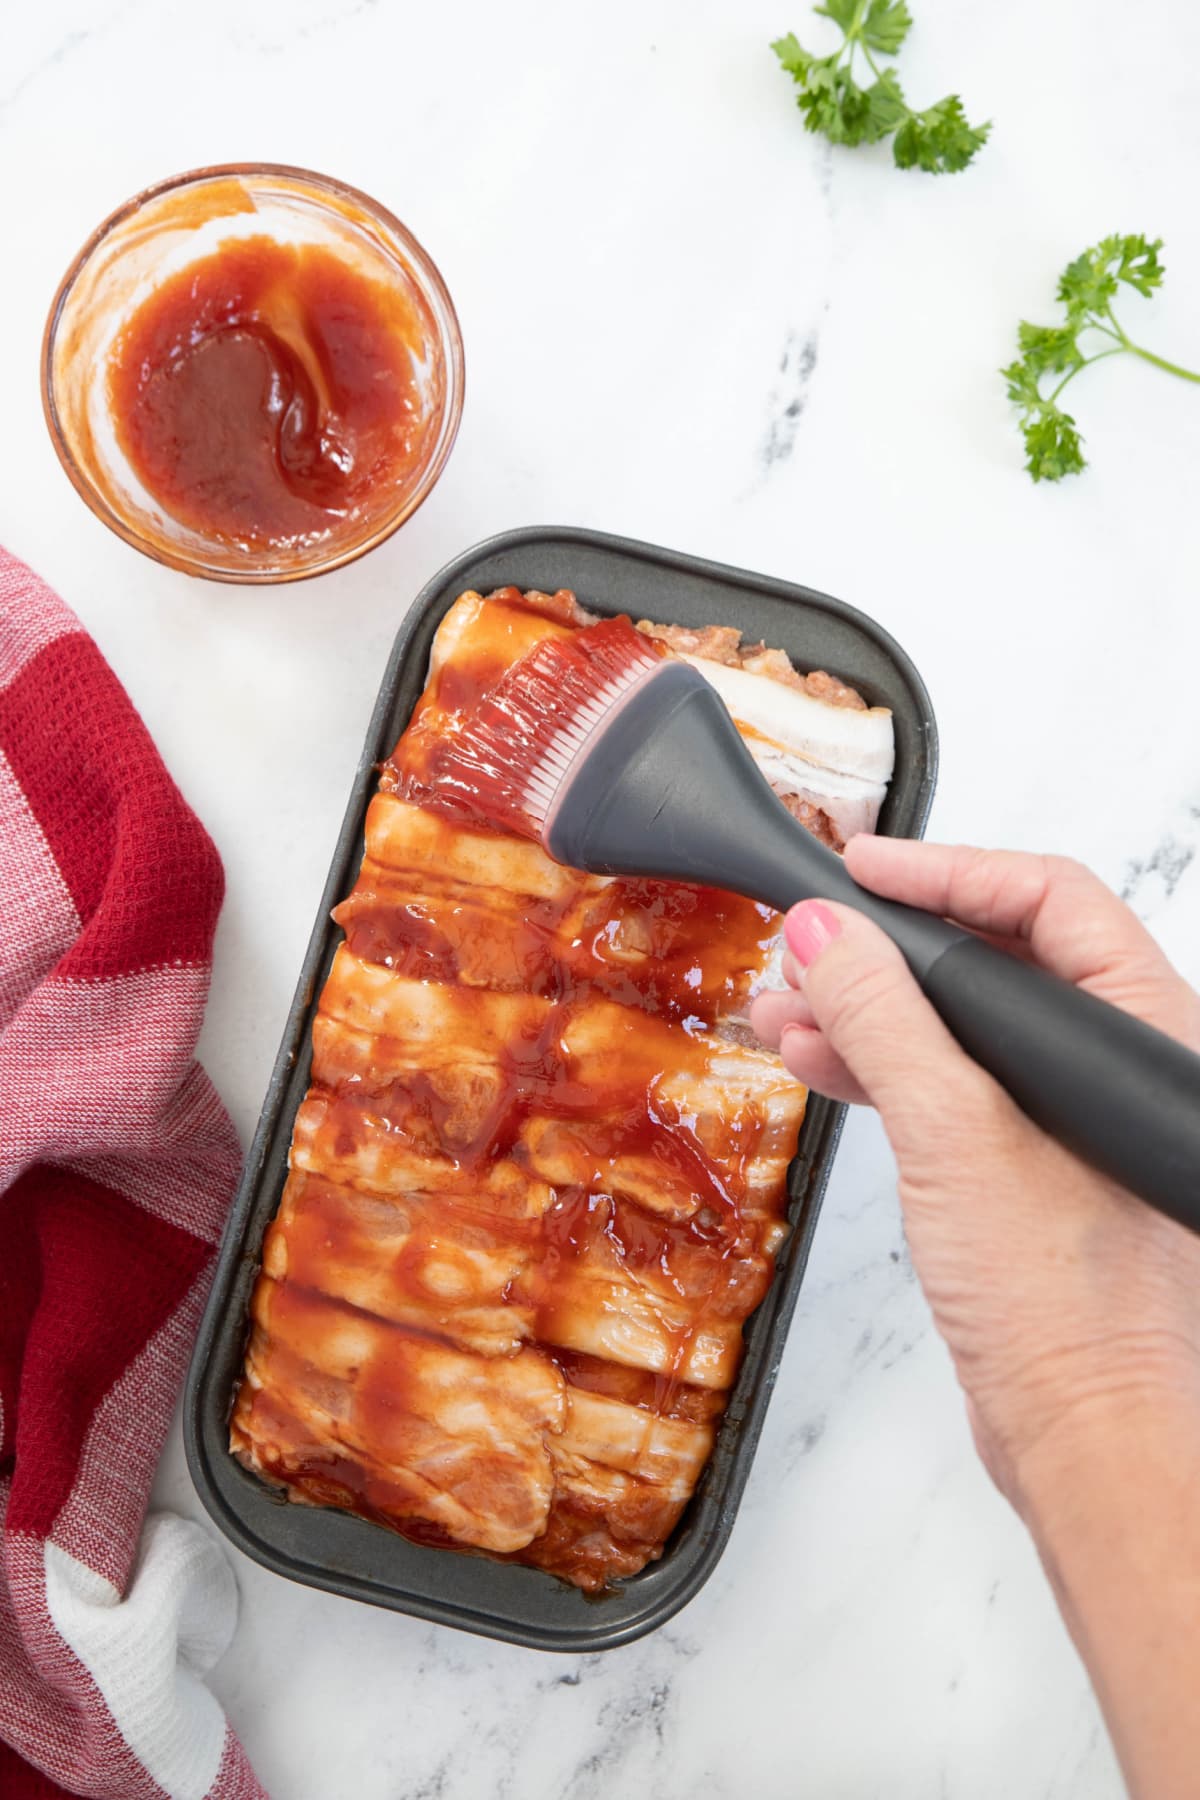 Brushing ketchup glaze over meatloaf wrapped with bacon